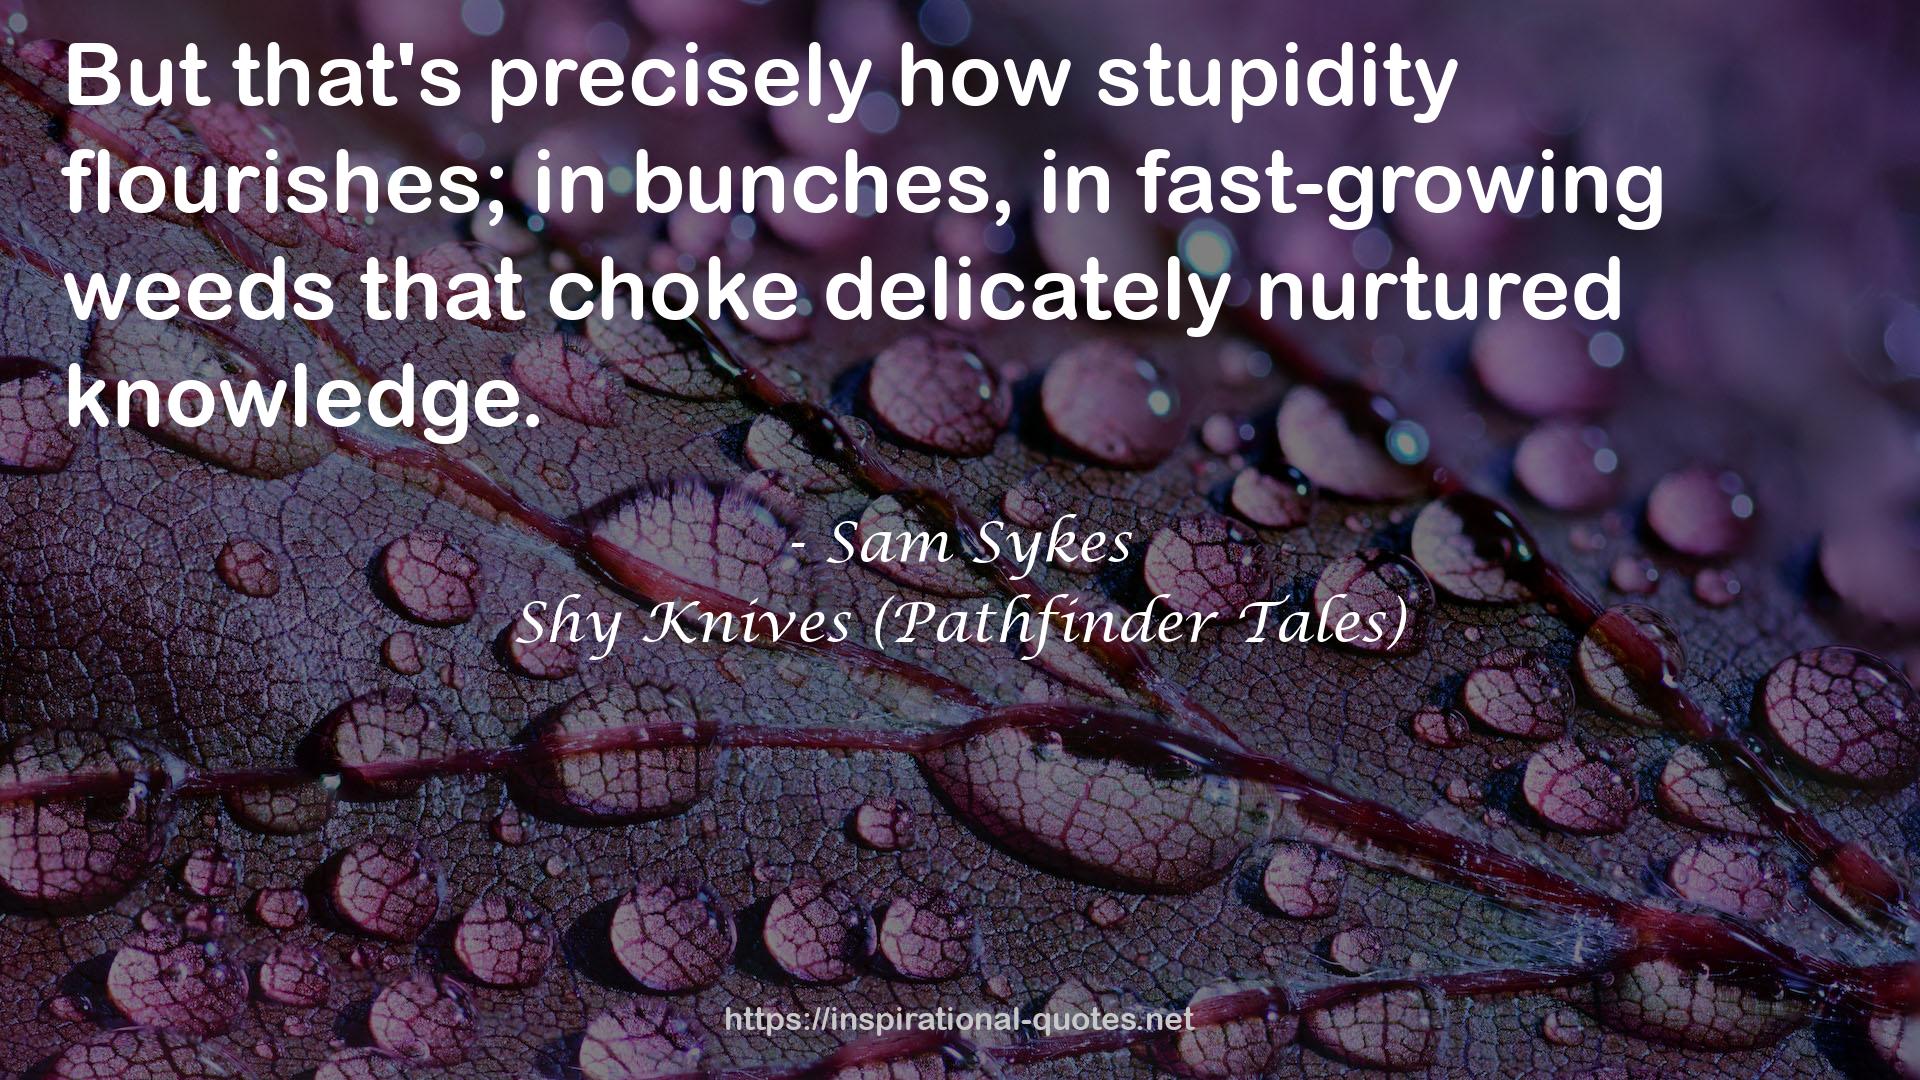 Sam Sykes QUOTES